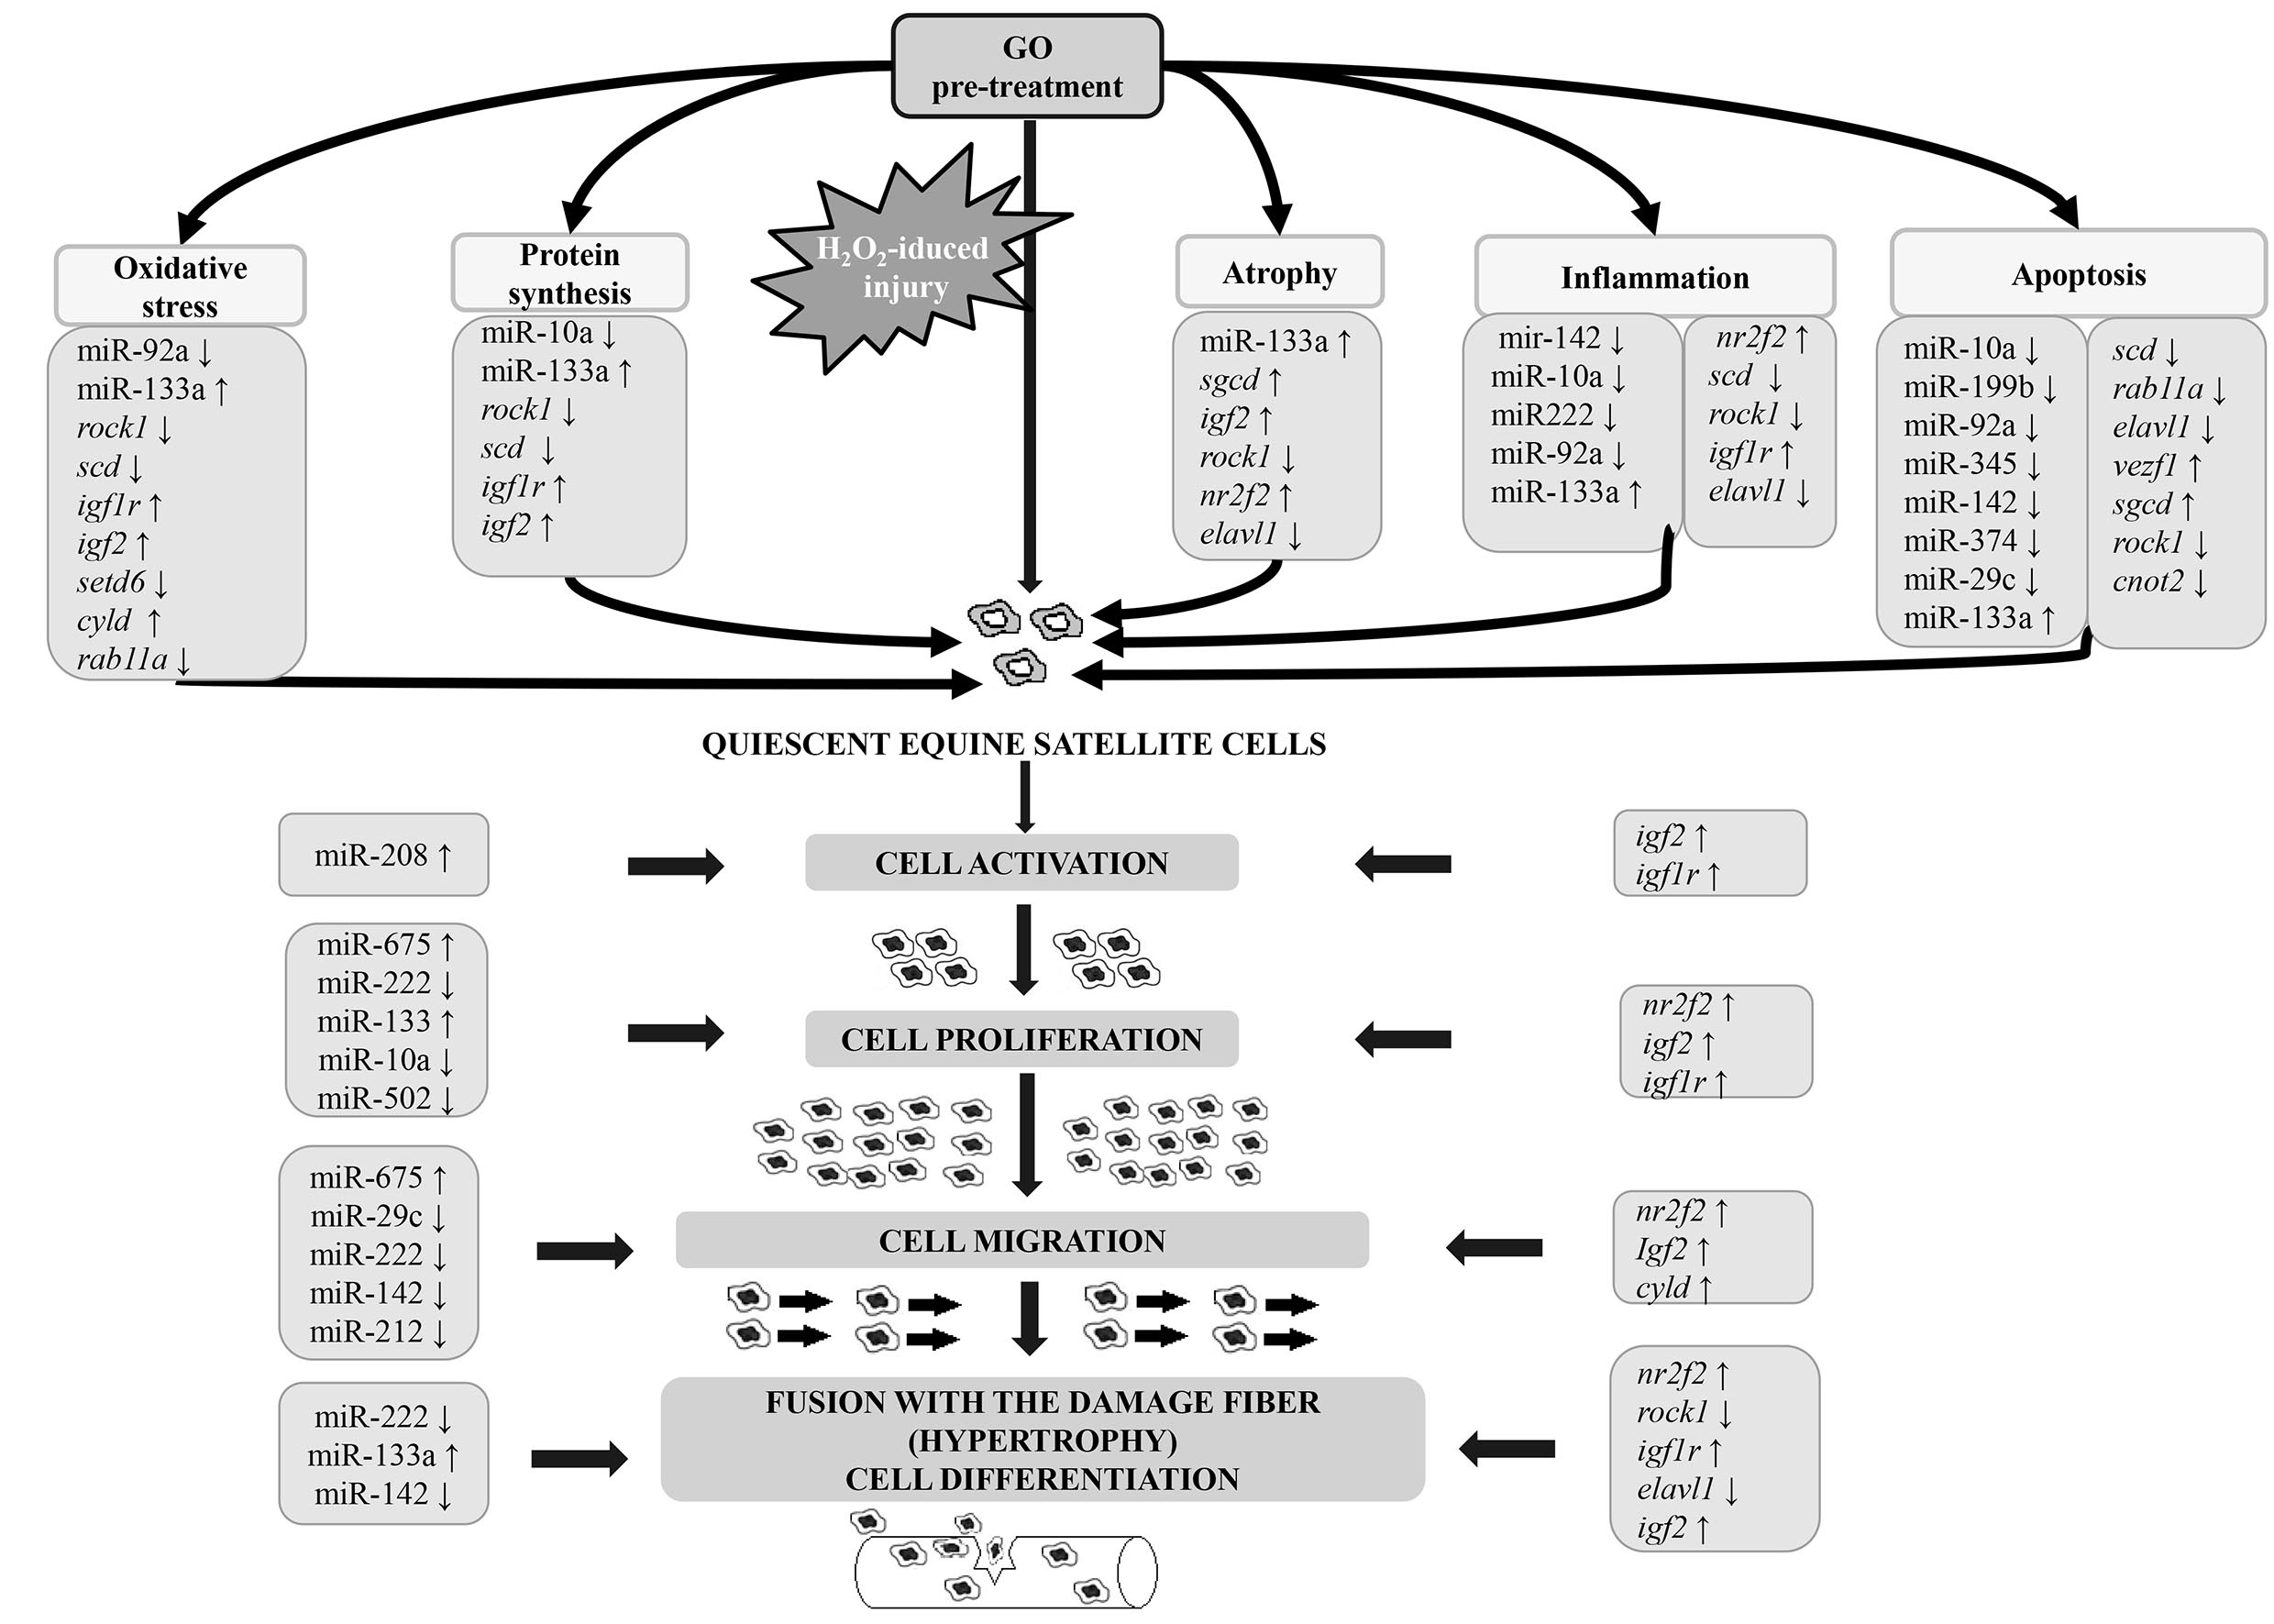 Nutrients | Free Full-Text | Simultaneous miRNA and mRNA Transcriptome  Profiling of Differentiating Equine Satellite Cells Treated with  Gamma-Oryzanol and Exposed to Hydrogen Peroxide | HTML